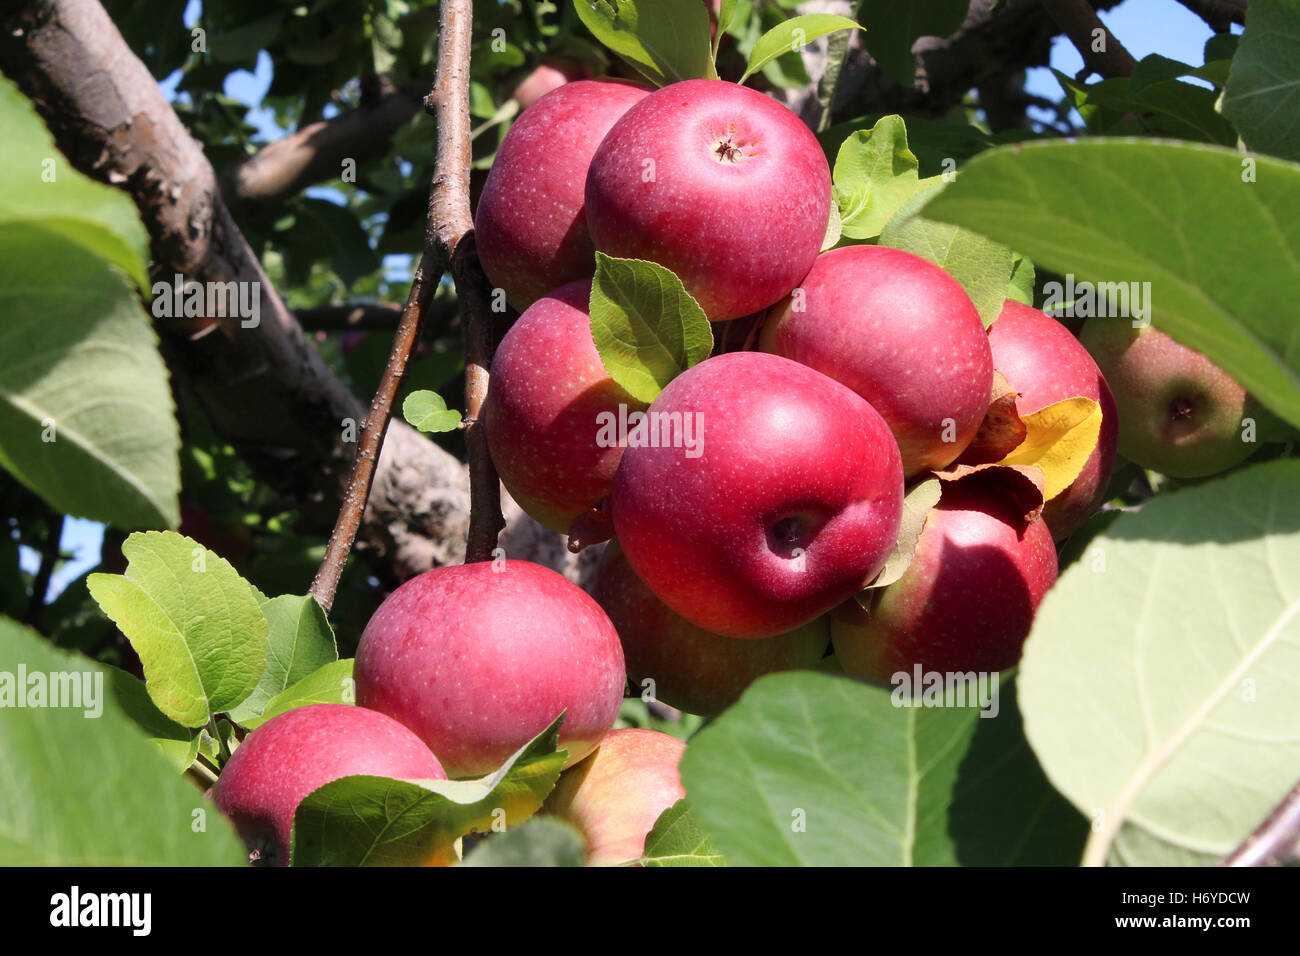 Apple orchard fruit cluster of red ripe apples in a bountiful bunch on a tree branch as an agricultural harvest of fresh natural food from an orchard. Stock Photo